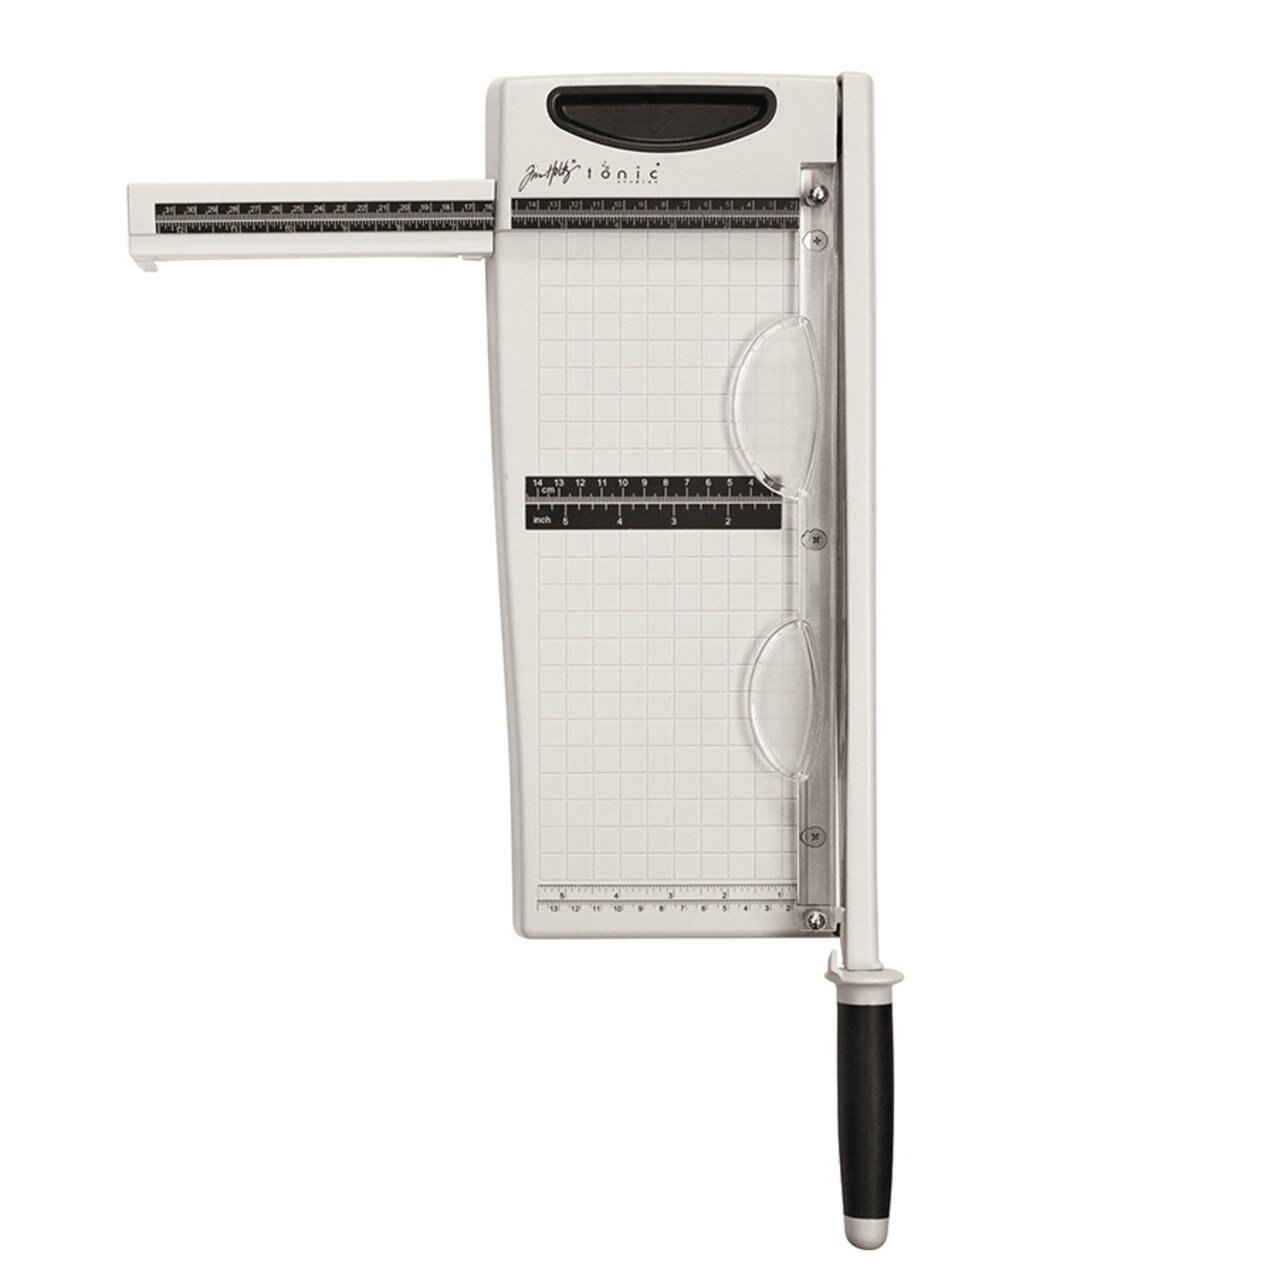 Tim Holtz Paper Cutter Tool - Maxi Guillotine Paper Trimmer for  Scrapbooking, Vinyl, and Craft Paper - 12.25 Inch Cutting Length with  Extendable Ruler and Grid Lines